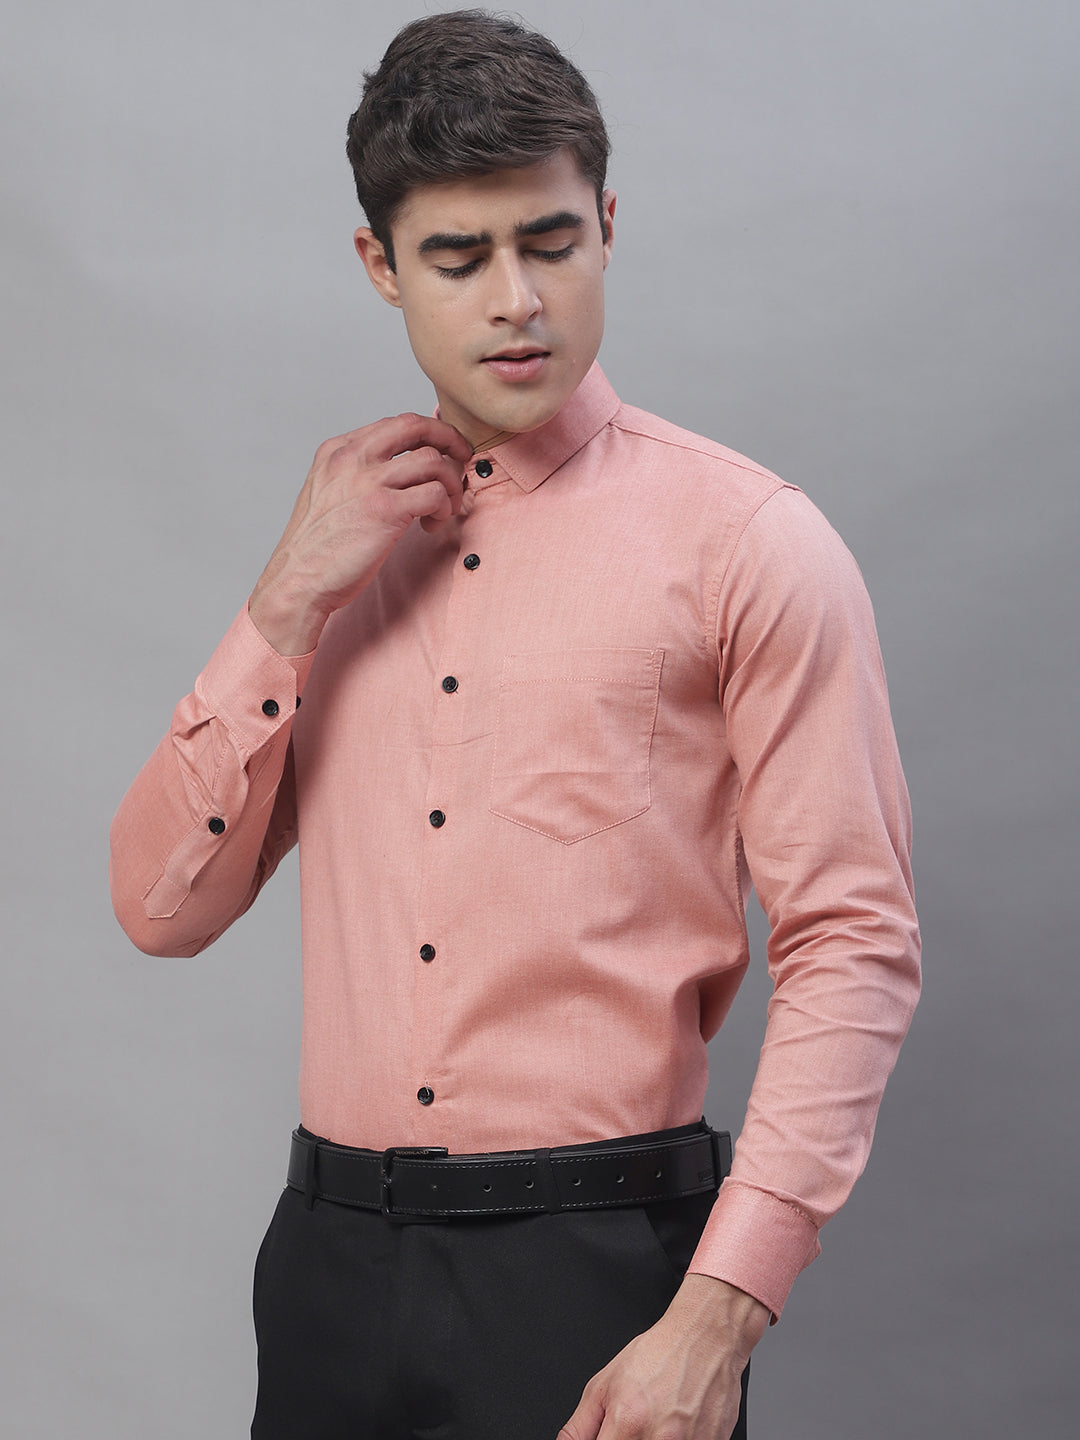 Tailored fit & Comfortable Solid Cotton Shirt - Peach